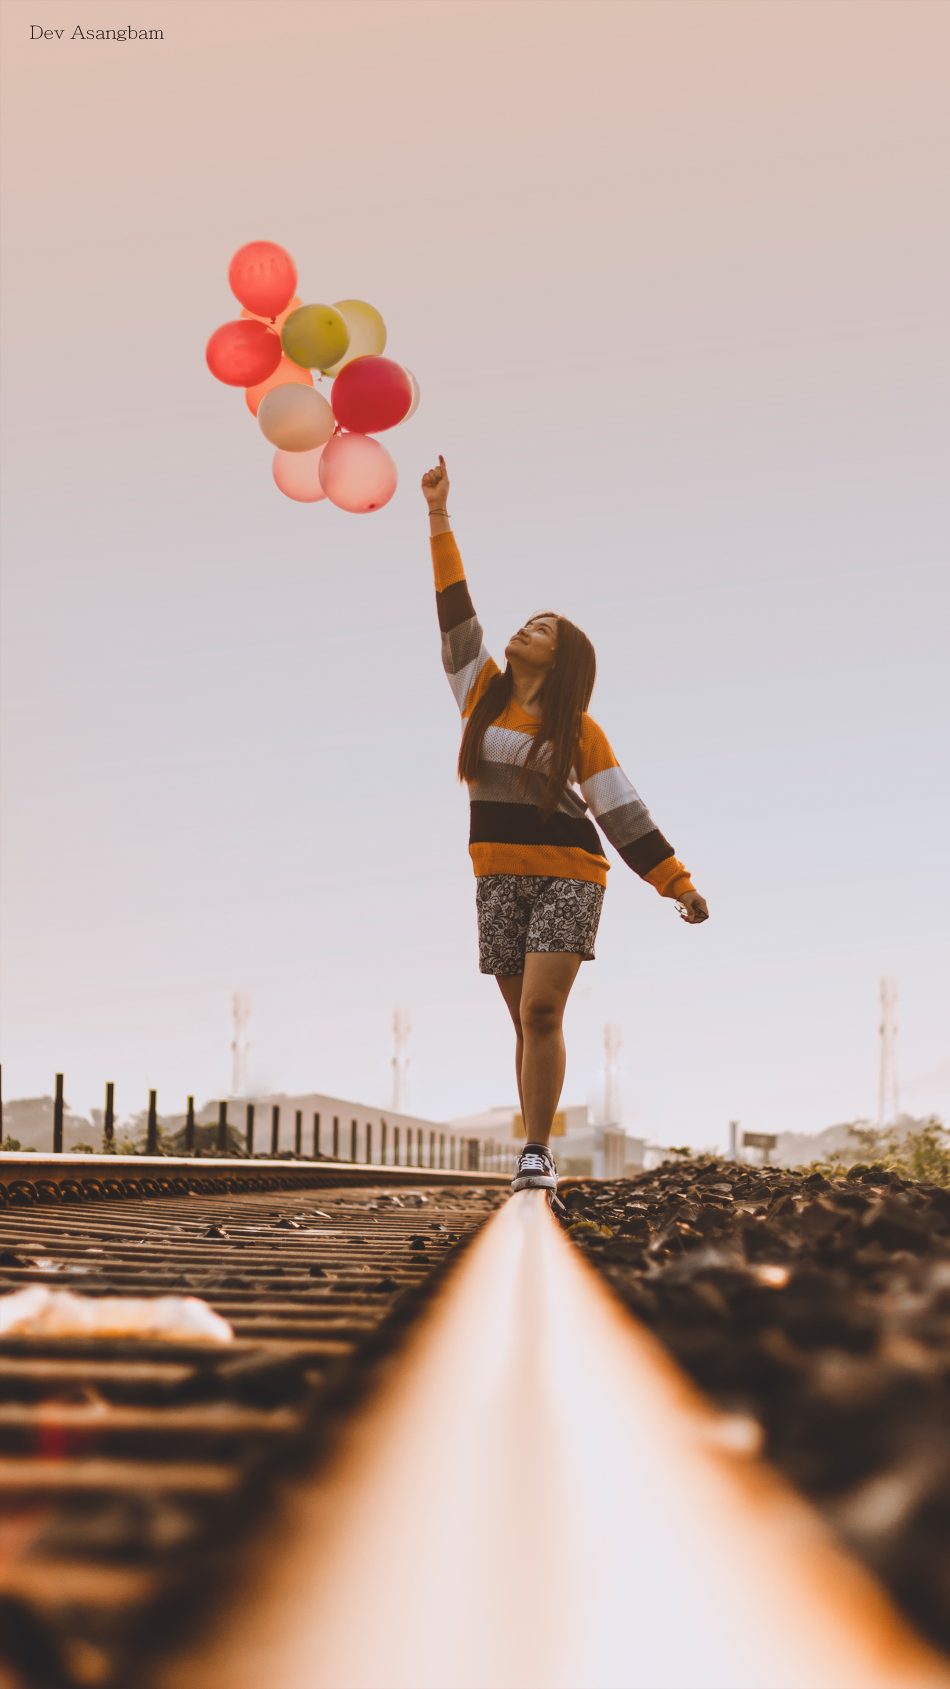 Happy Girl Balloons Train Track Photography 4K Ultra HD Mobile Wallpaper